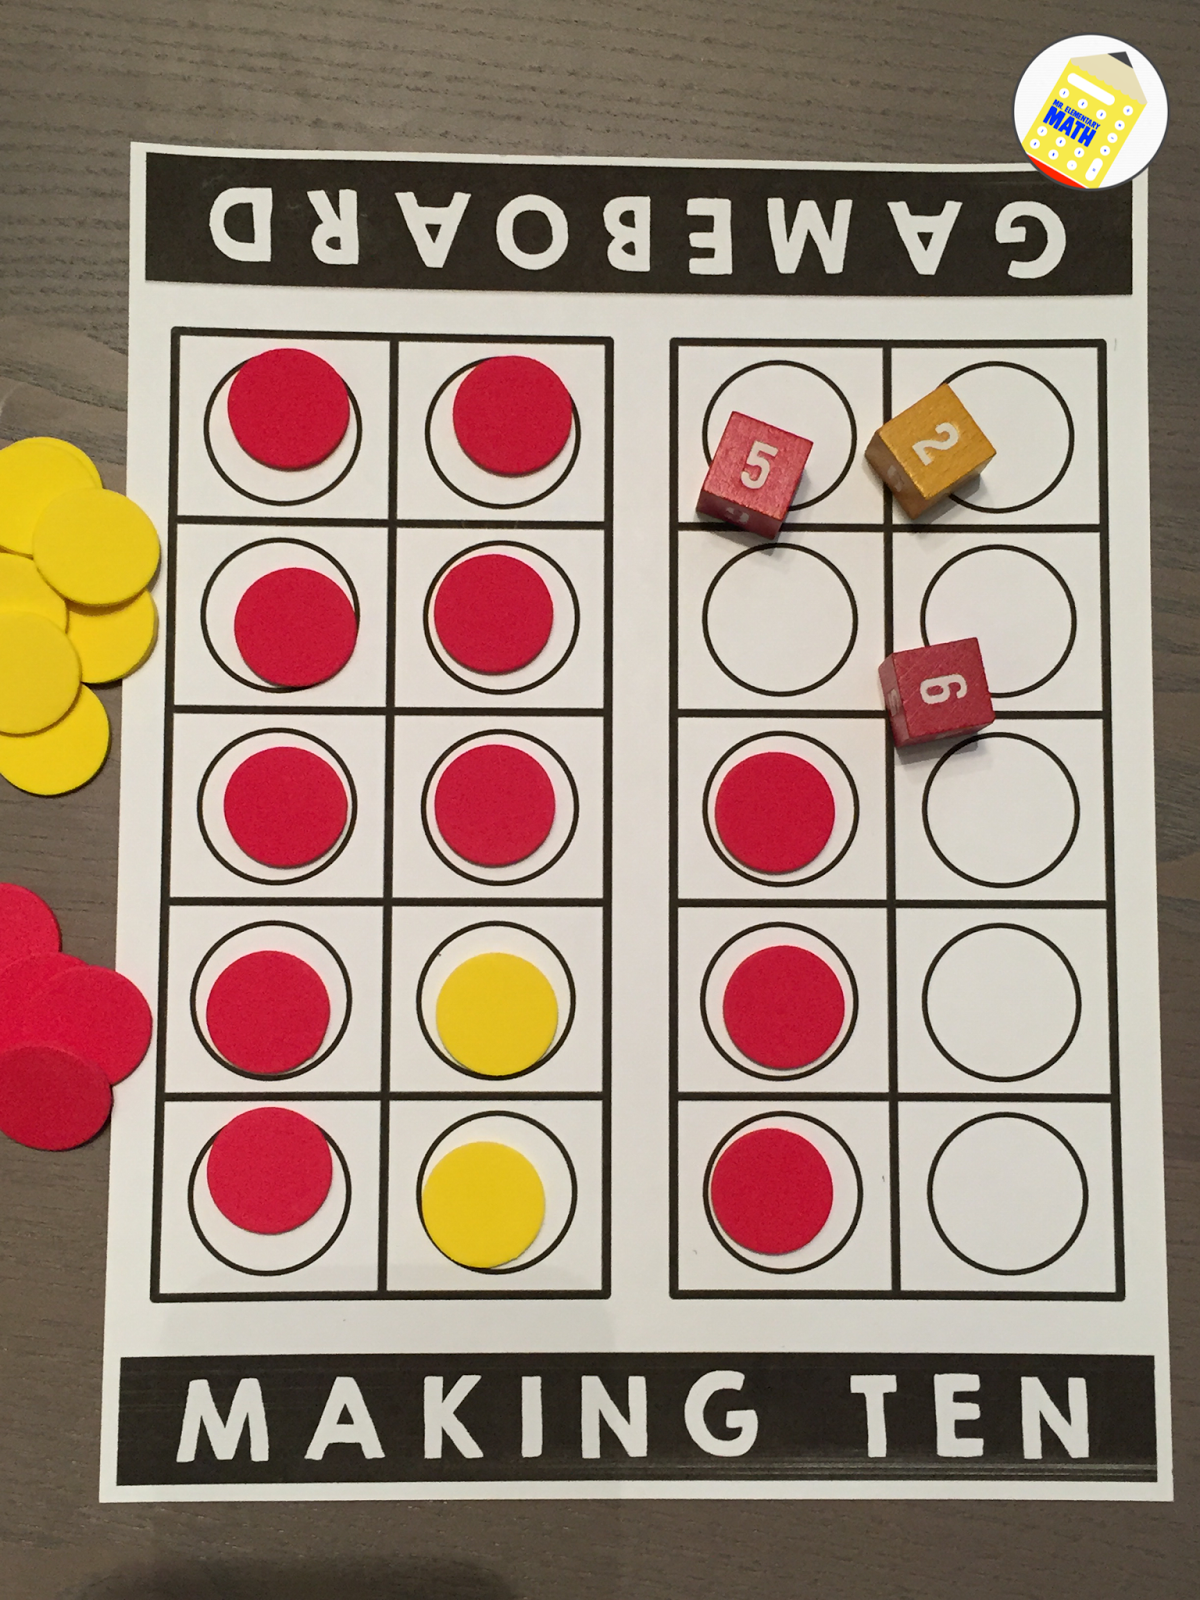 Mr Elementary Math The Power Of Making Tens